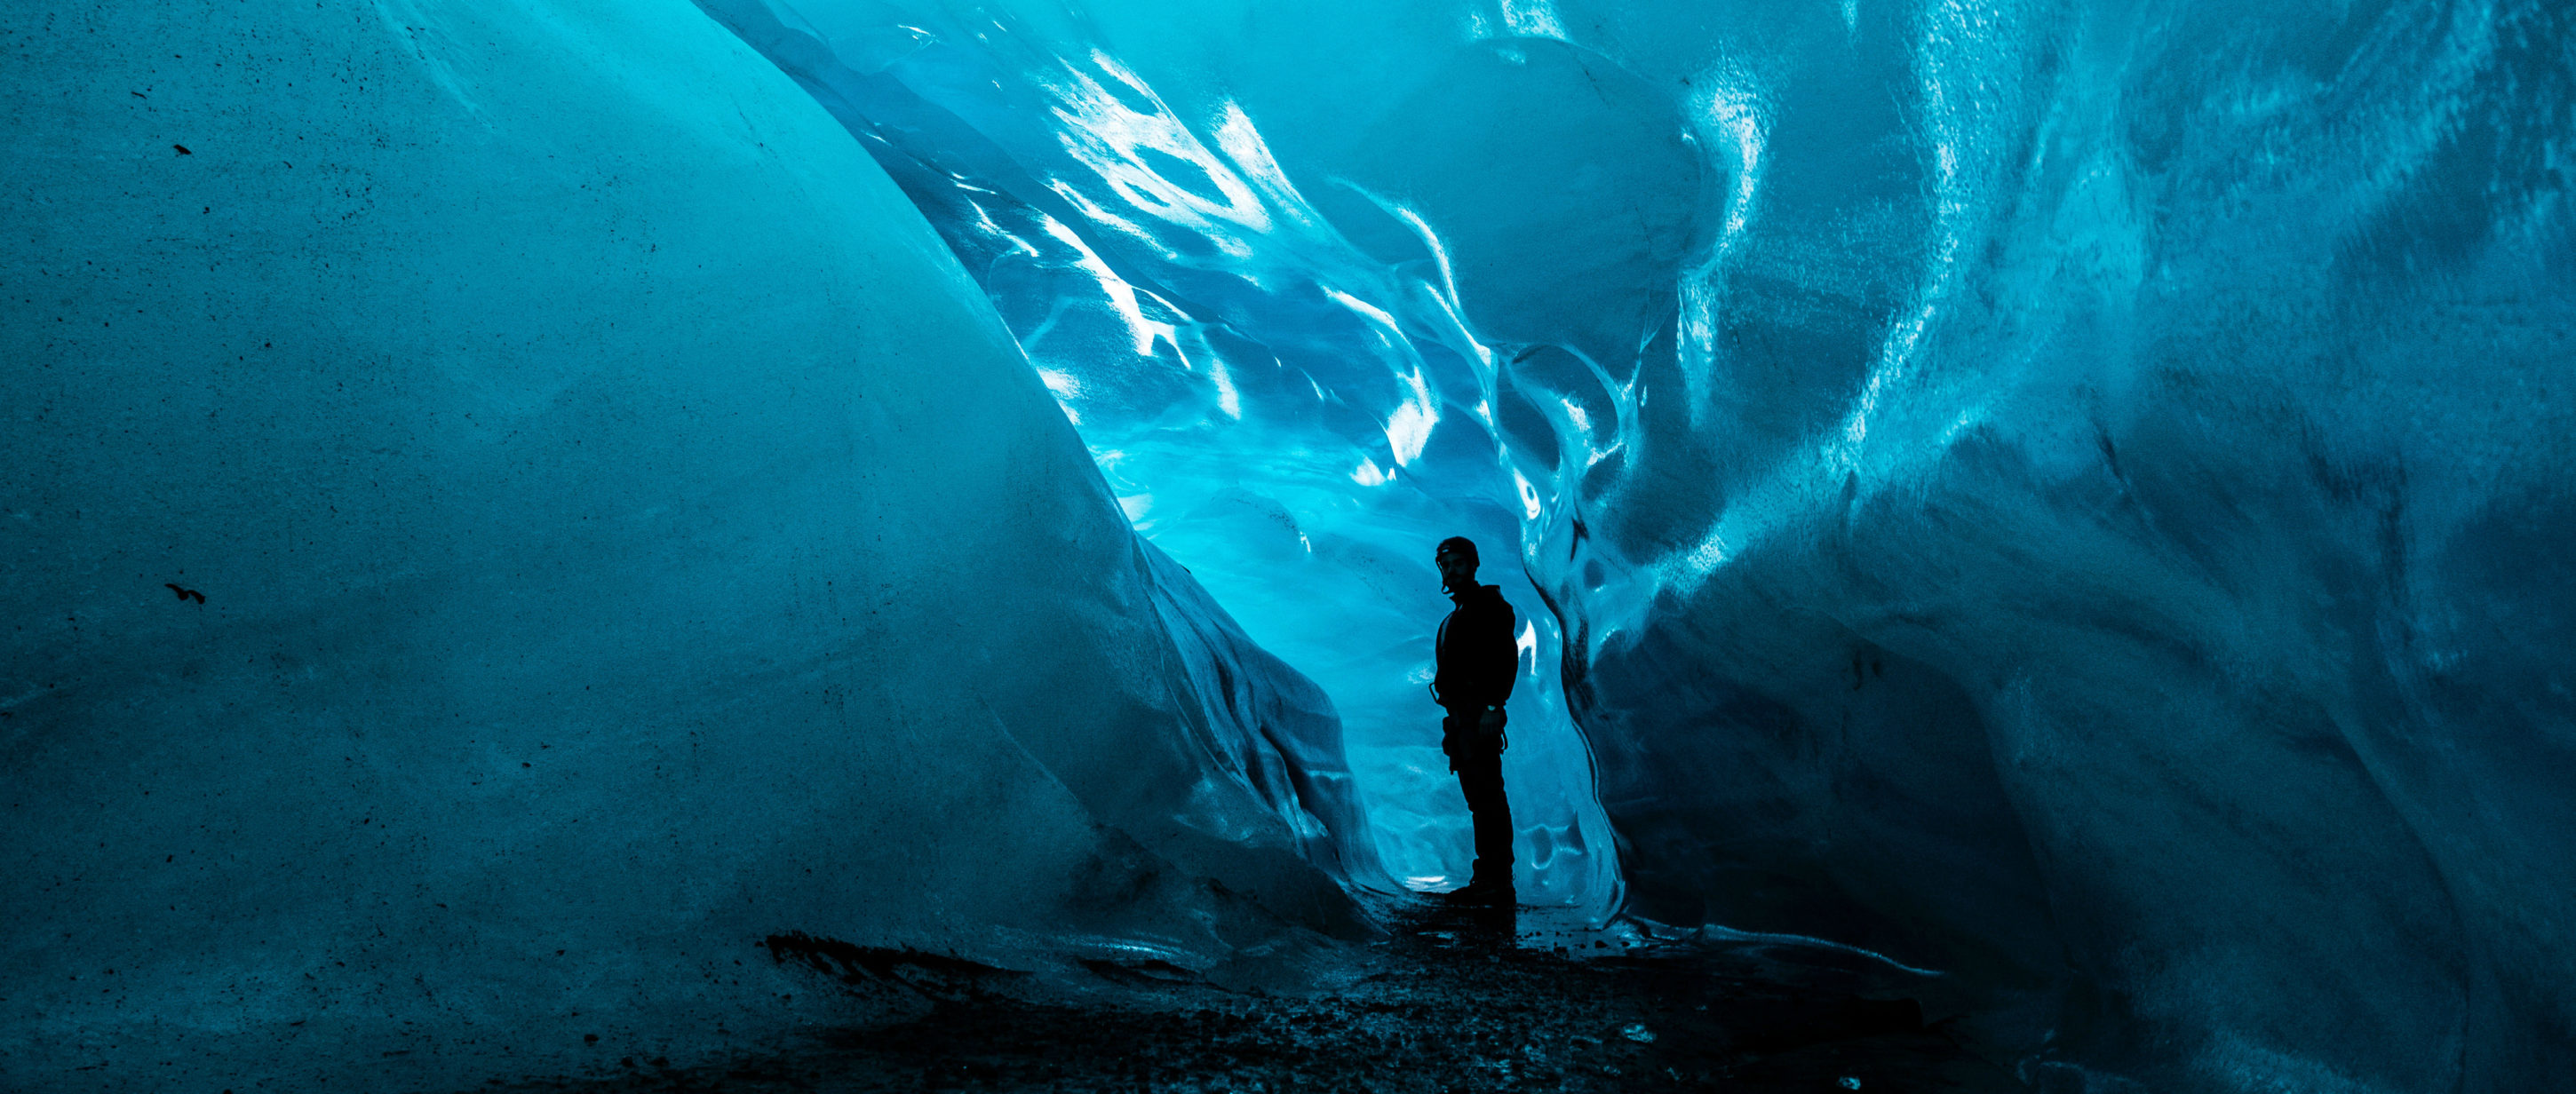 10 Things I Wish I'd Known Before Going To Iceland